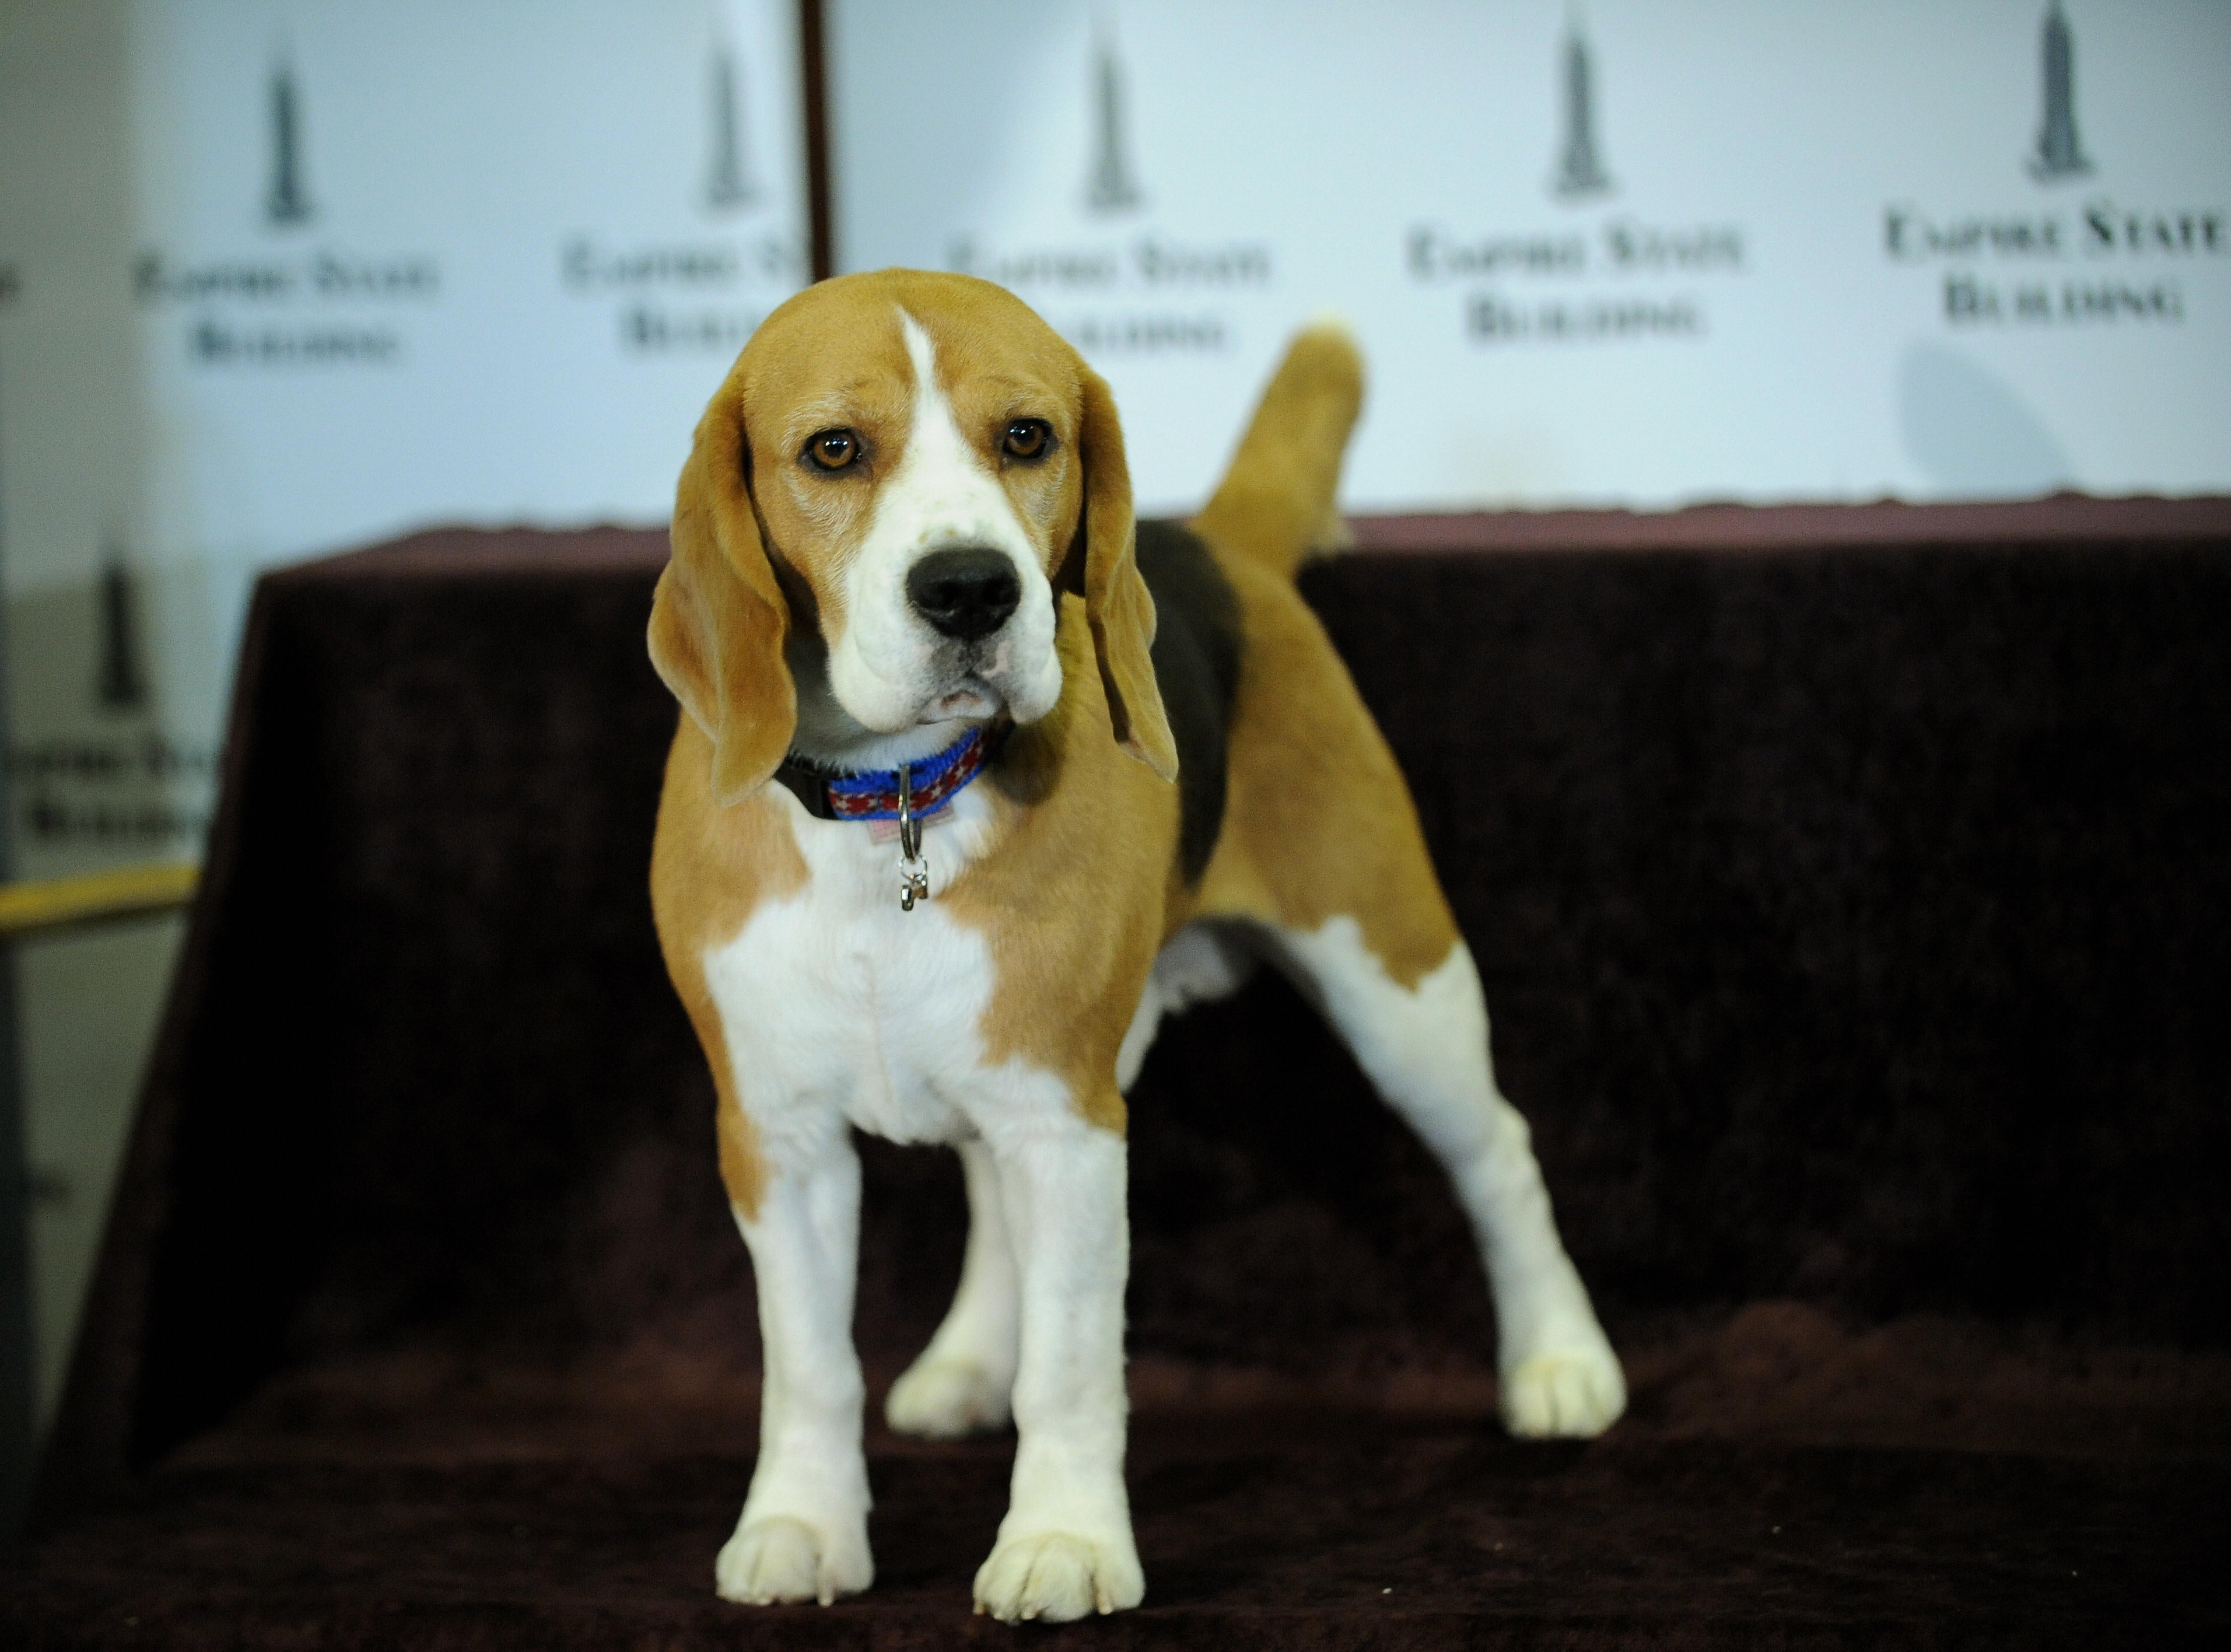 File: Uno, a beagle, poses before a lighting ceremony at the Empire State Building